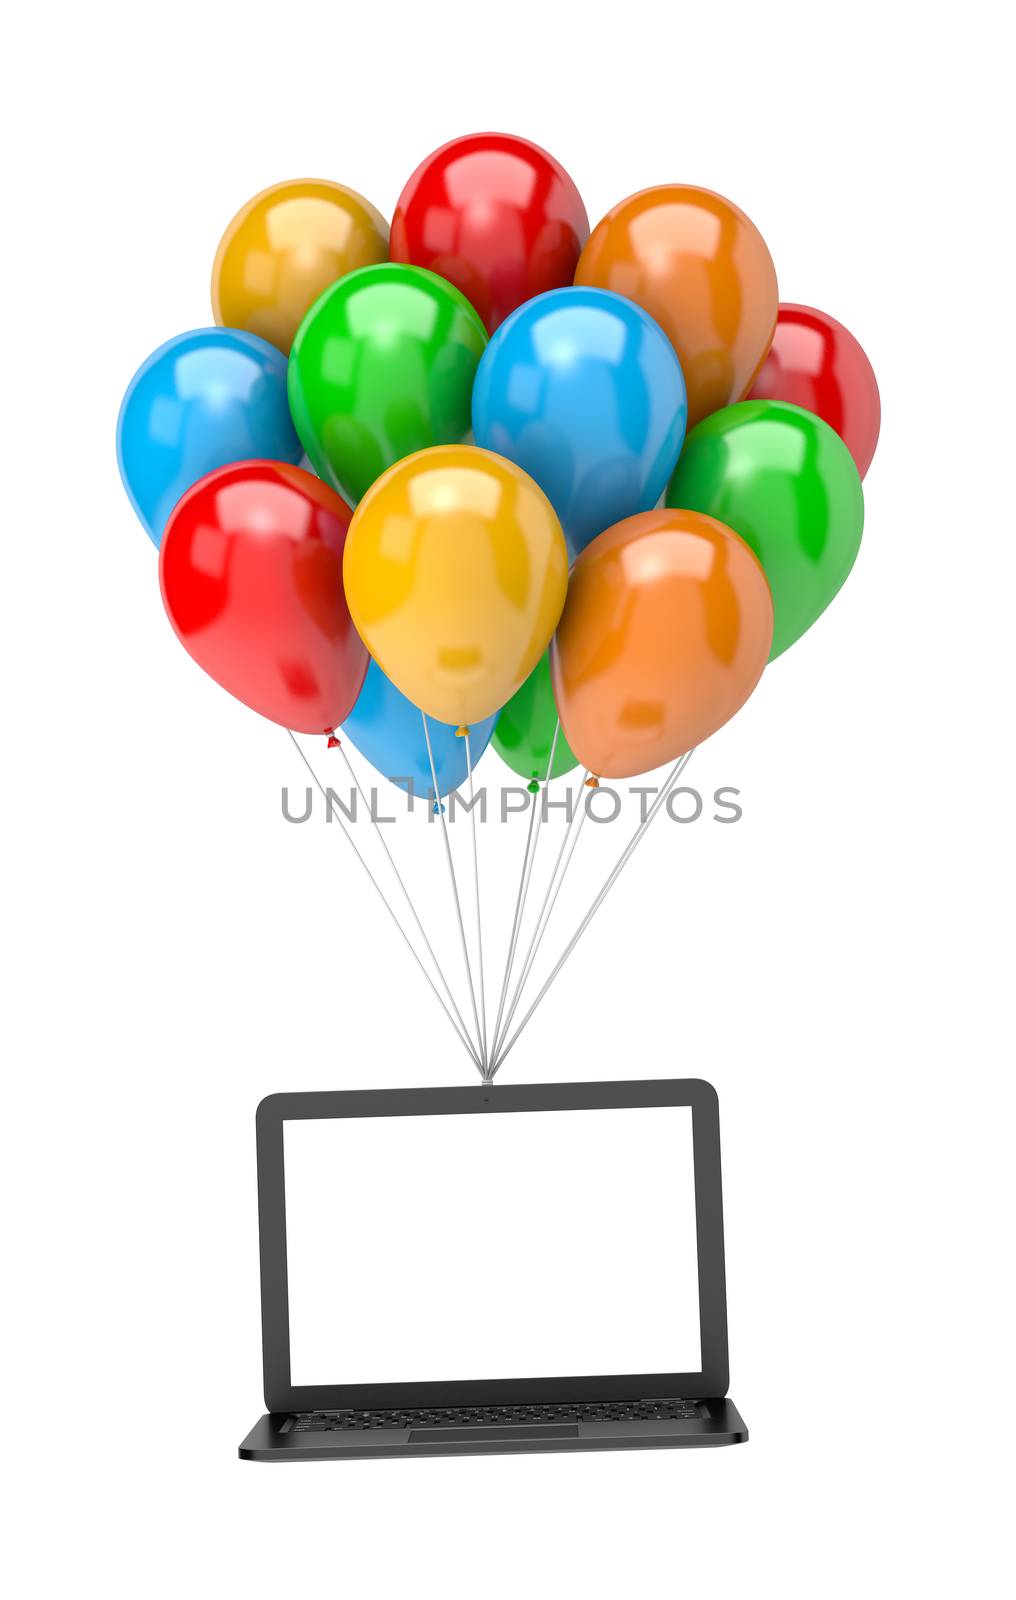 Bunch of Balloons Holding Up a Laptop Computer by make